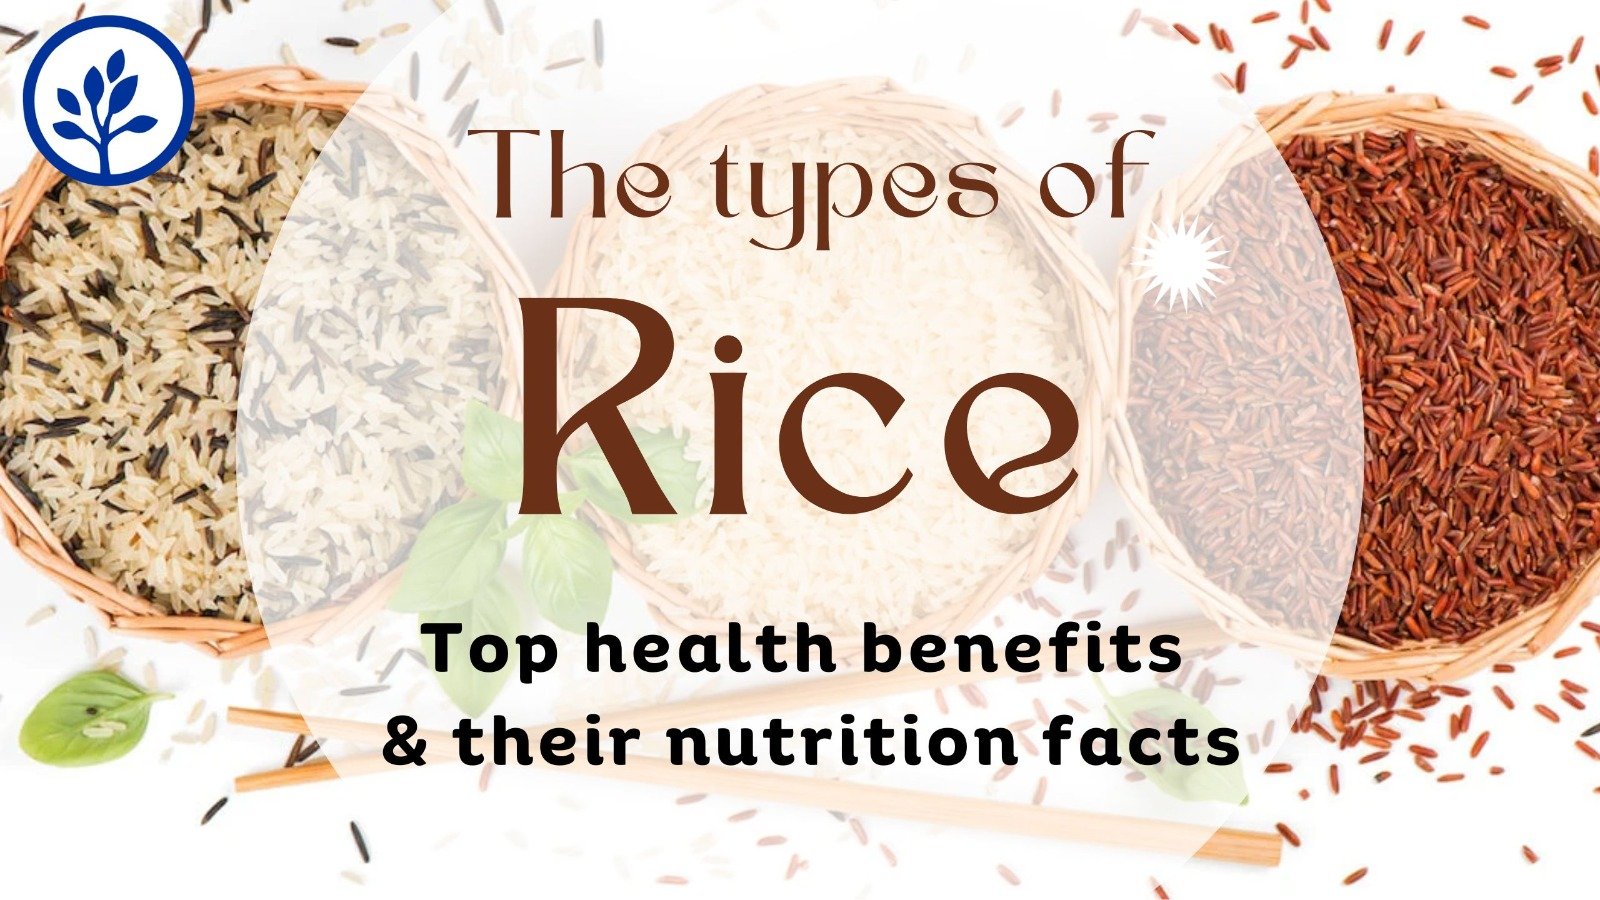 The types of rice, Top health benefits & their nutrition facts